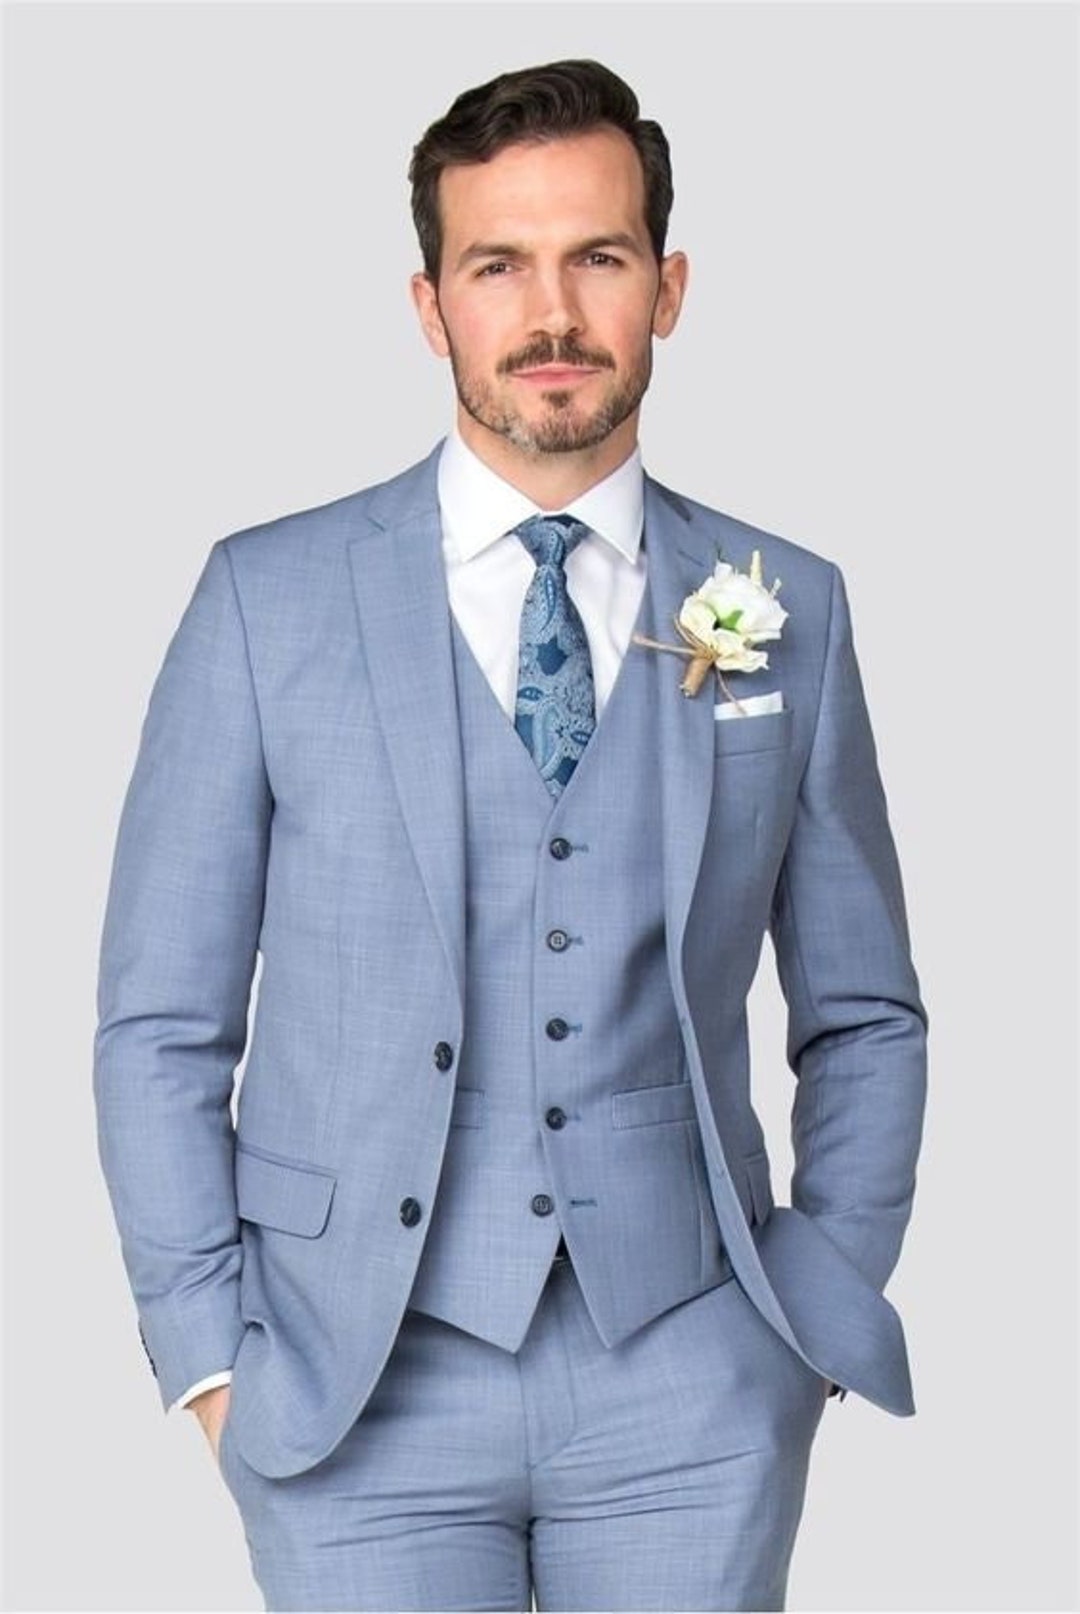 Man Suit Light Blue 3 Piece Suit Wedding Suit For Groom And Etsy